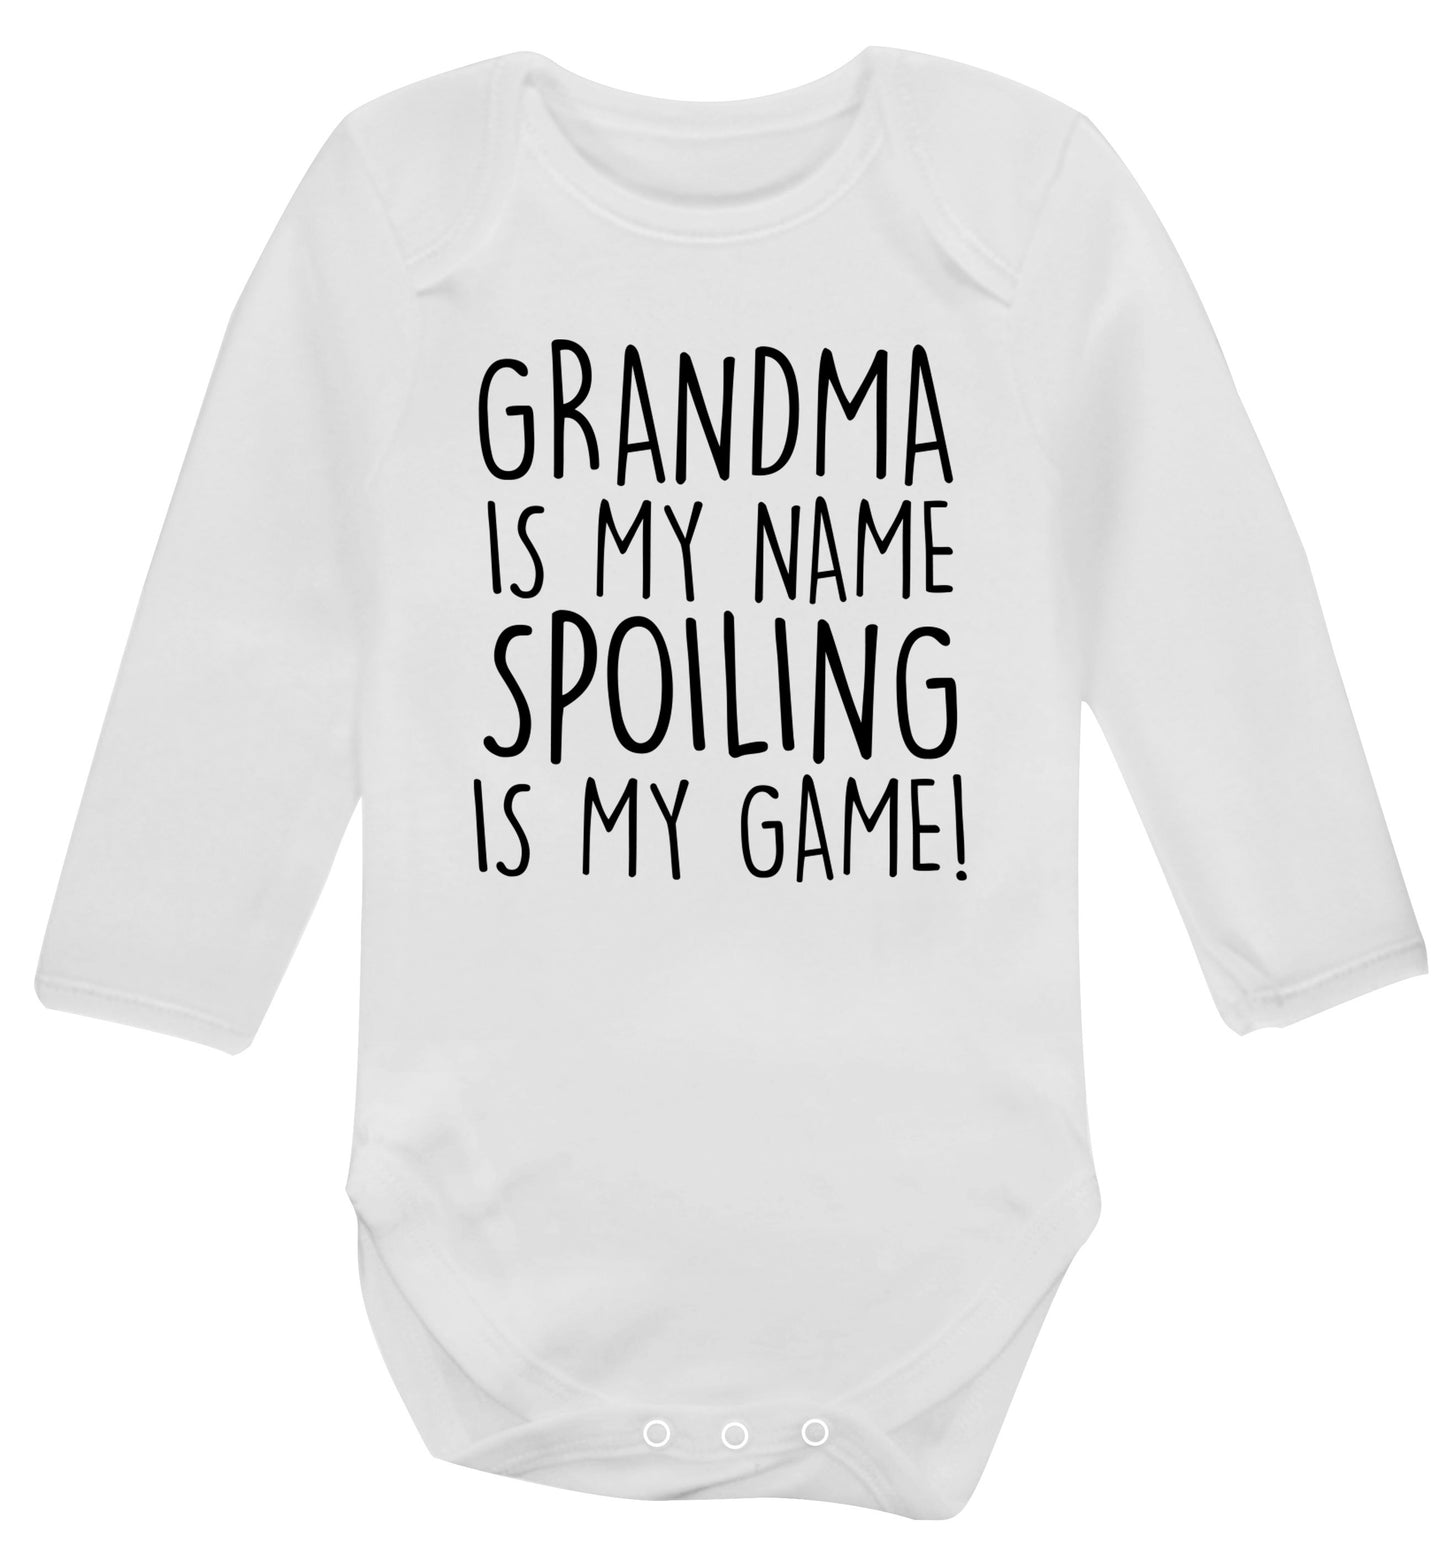 Grandma is my name, spoiling is my game Baby Vest long sleeved white 6-12 months